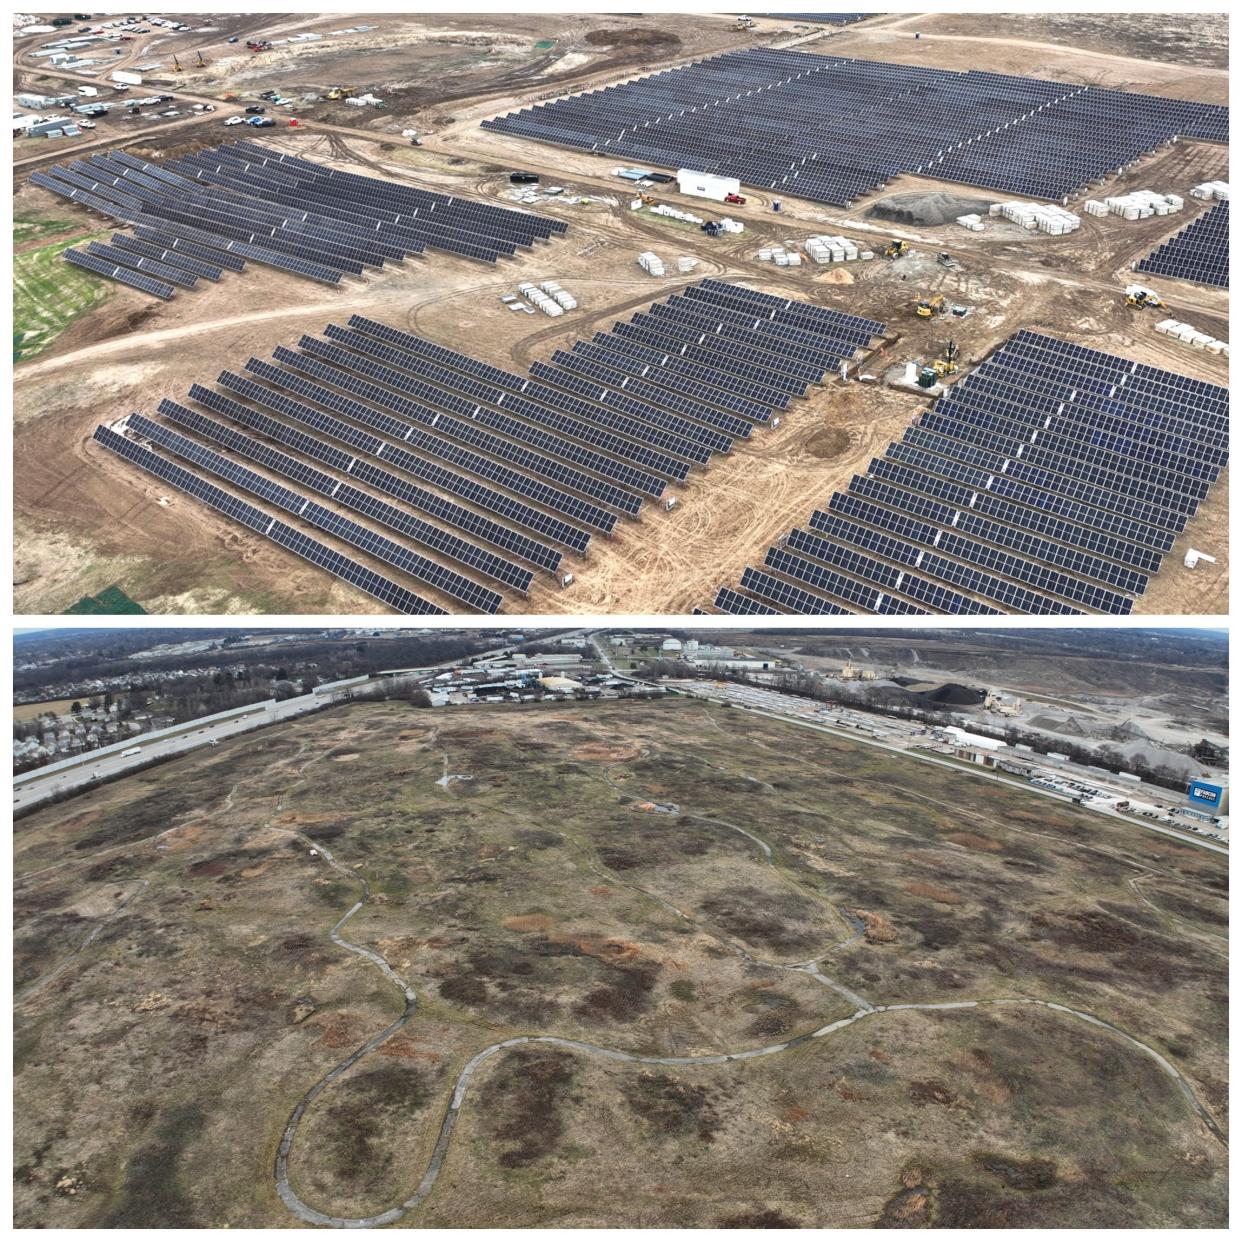 While construction is well underway at another city-owned solar facility at 5600 Parsons Ave(top photo), the former Phoenix landfill (bottom photo) site has yet to see any planned solar-panel construction despite it being a year after it was initially supposed to open.